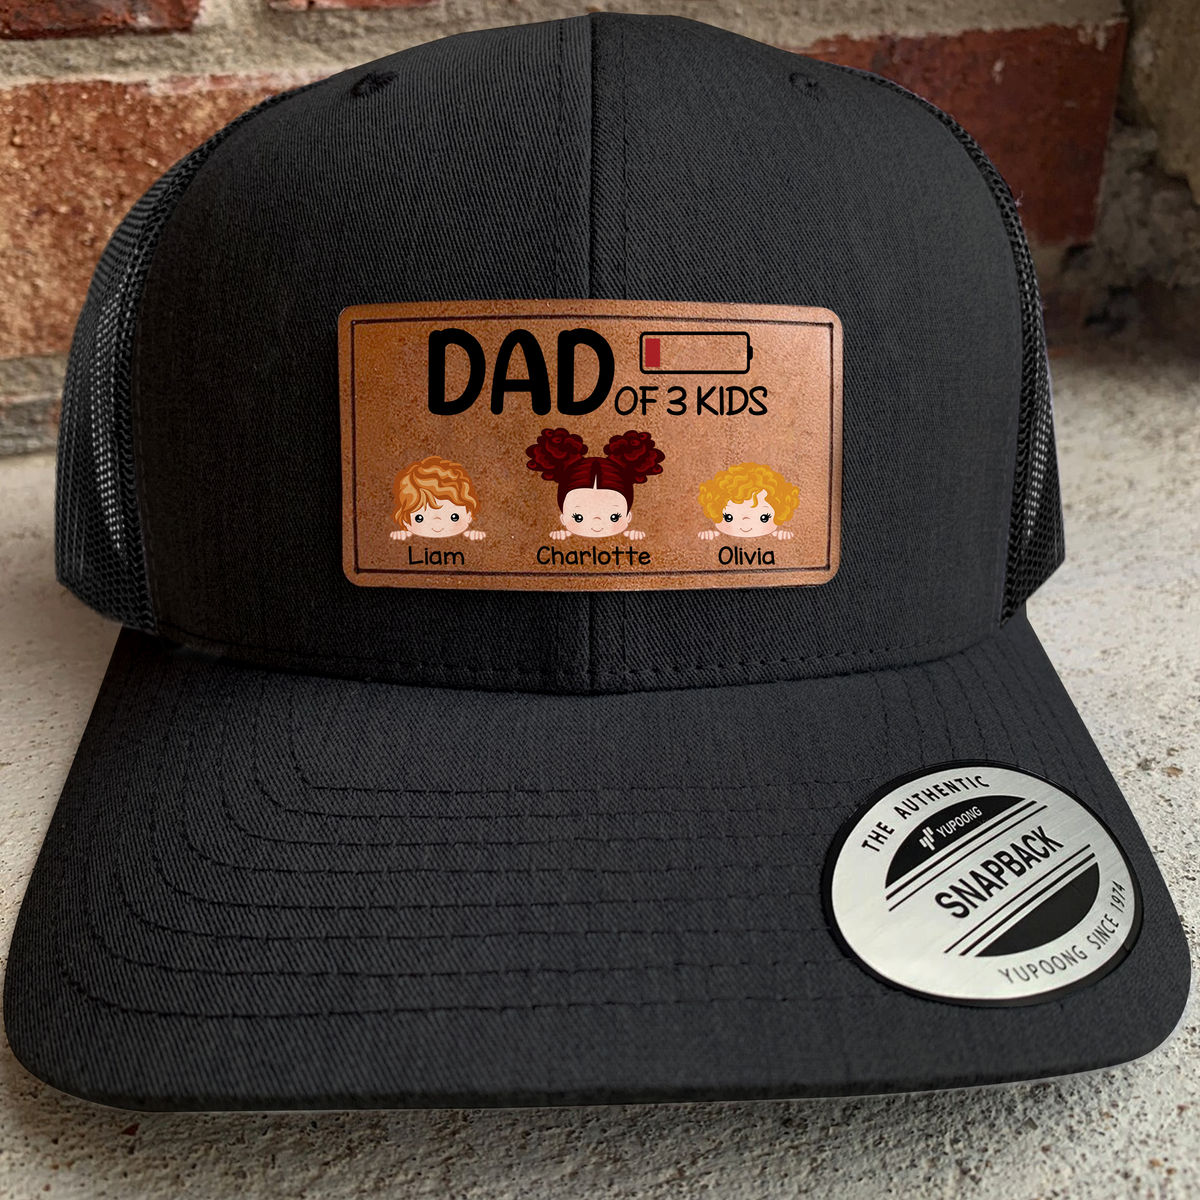 Dad Hats - Dad Of Kid - Personalized Cap Ver 2 - Gifts For Him, Dad, Family Members, Father's Day Gifts, Birthday, Xmas Gifts_5